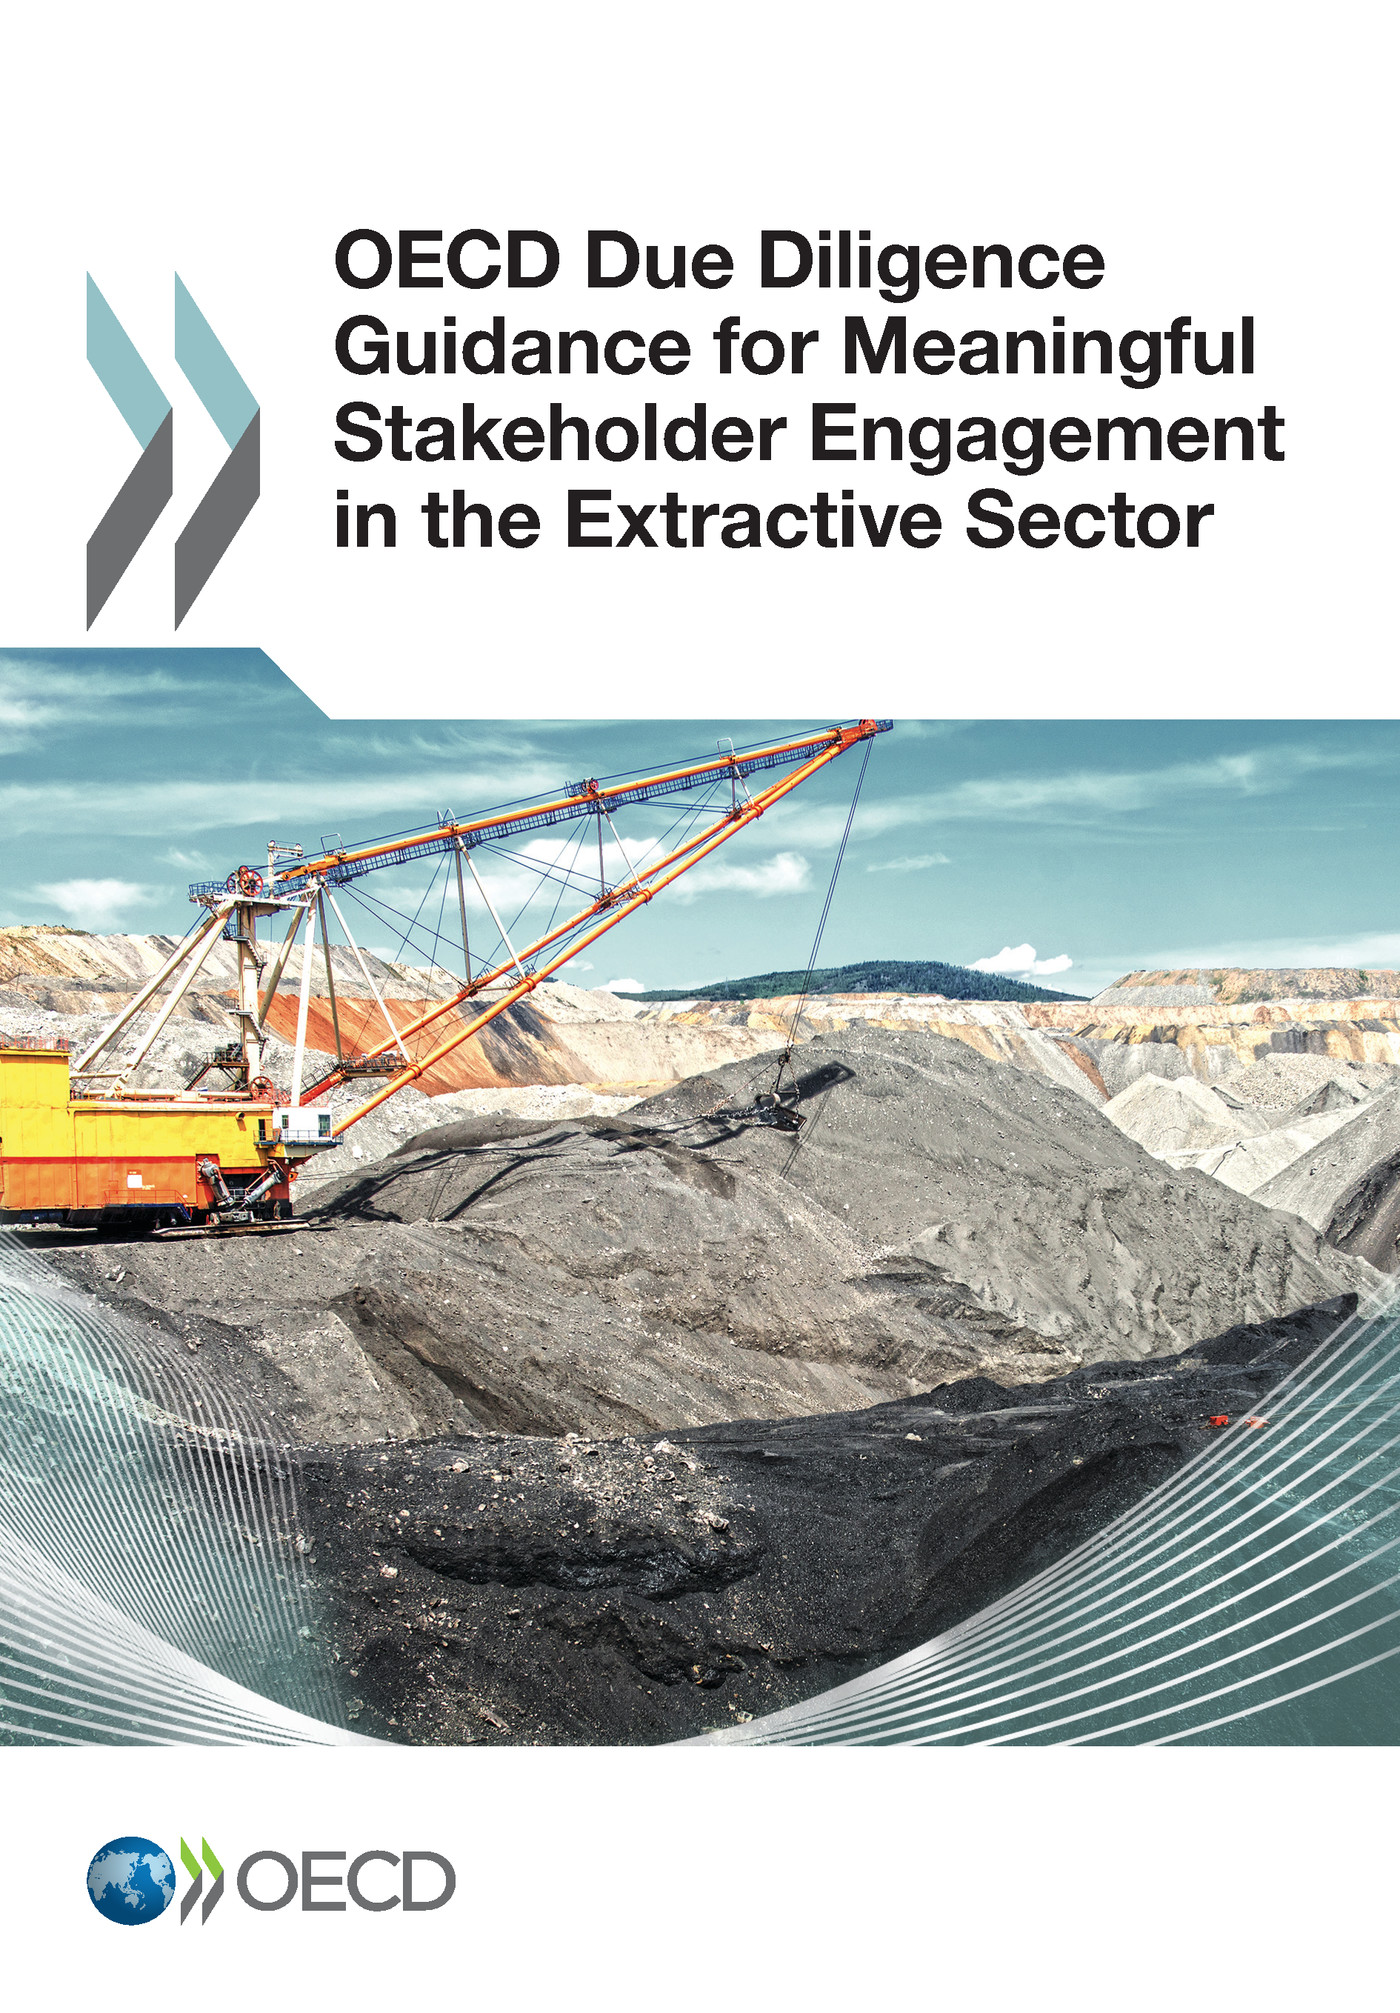 OECD Due Diligence Guidance for Meaningful Stakeholder Engagement in the Extractive Sector -  Collectif - OCDE / OECD